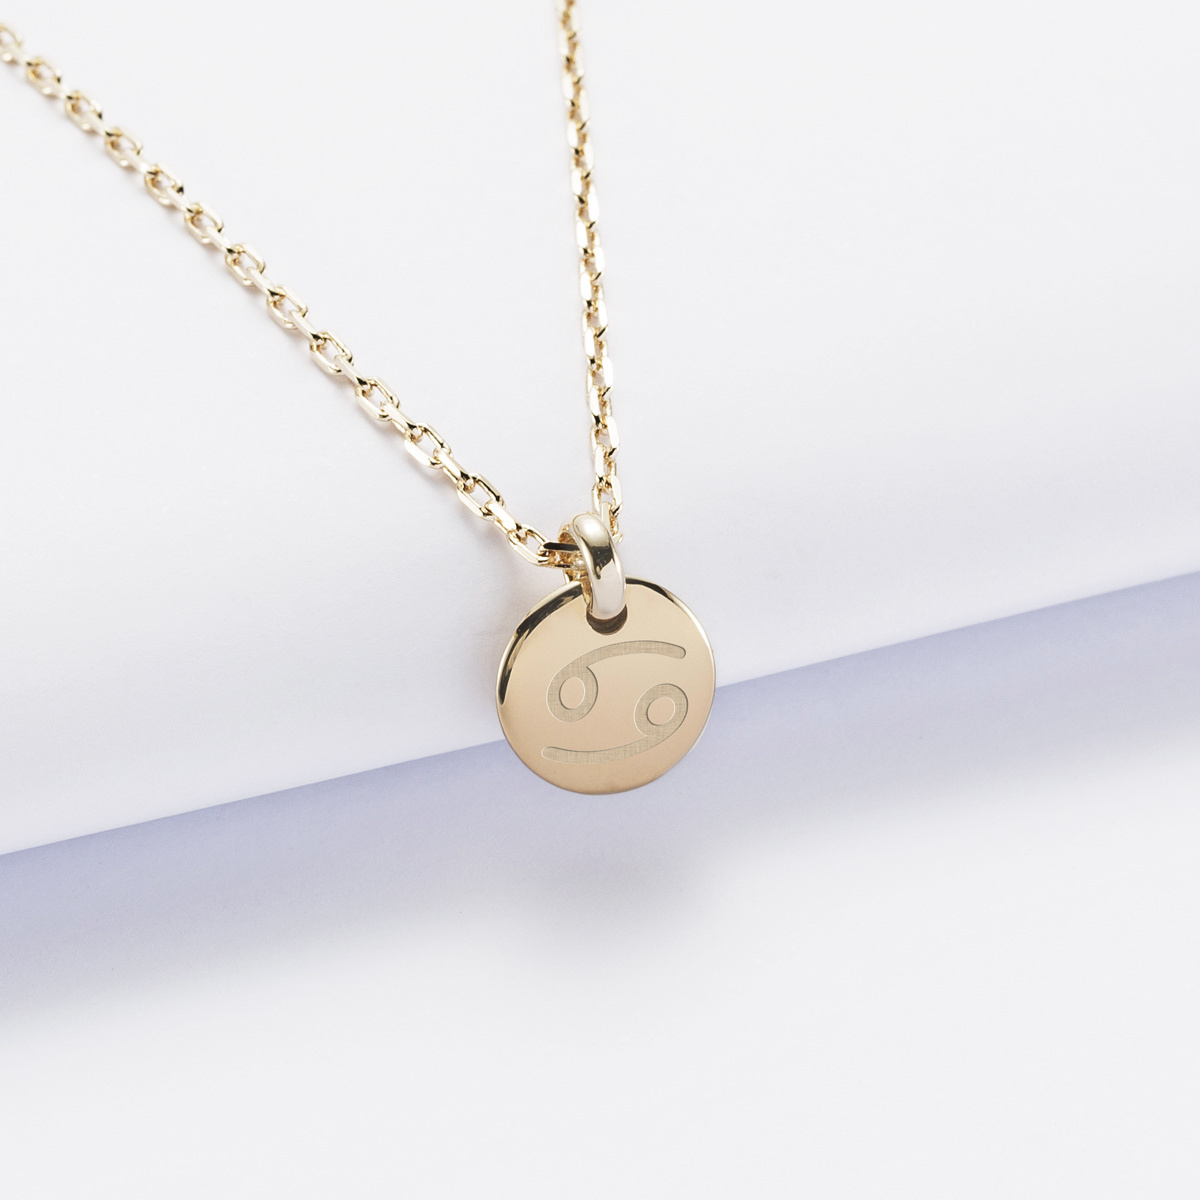 Personalised initial engraved gold plated medallion pendant 10 mm – ‘Astro’ special edition